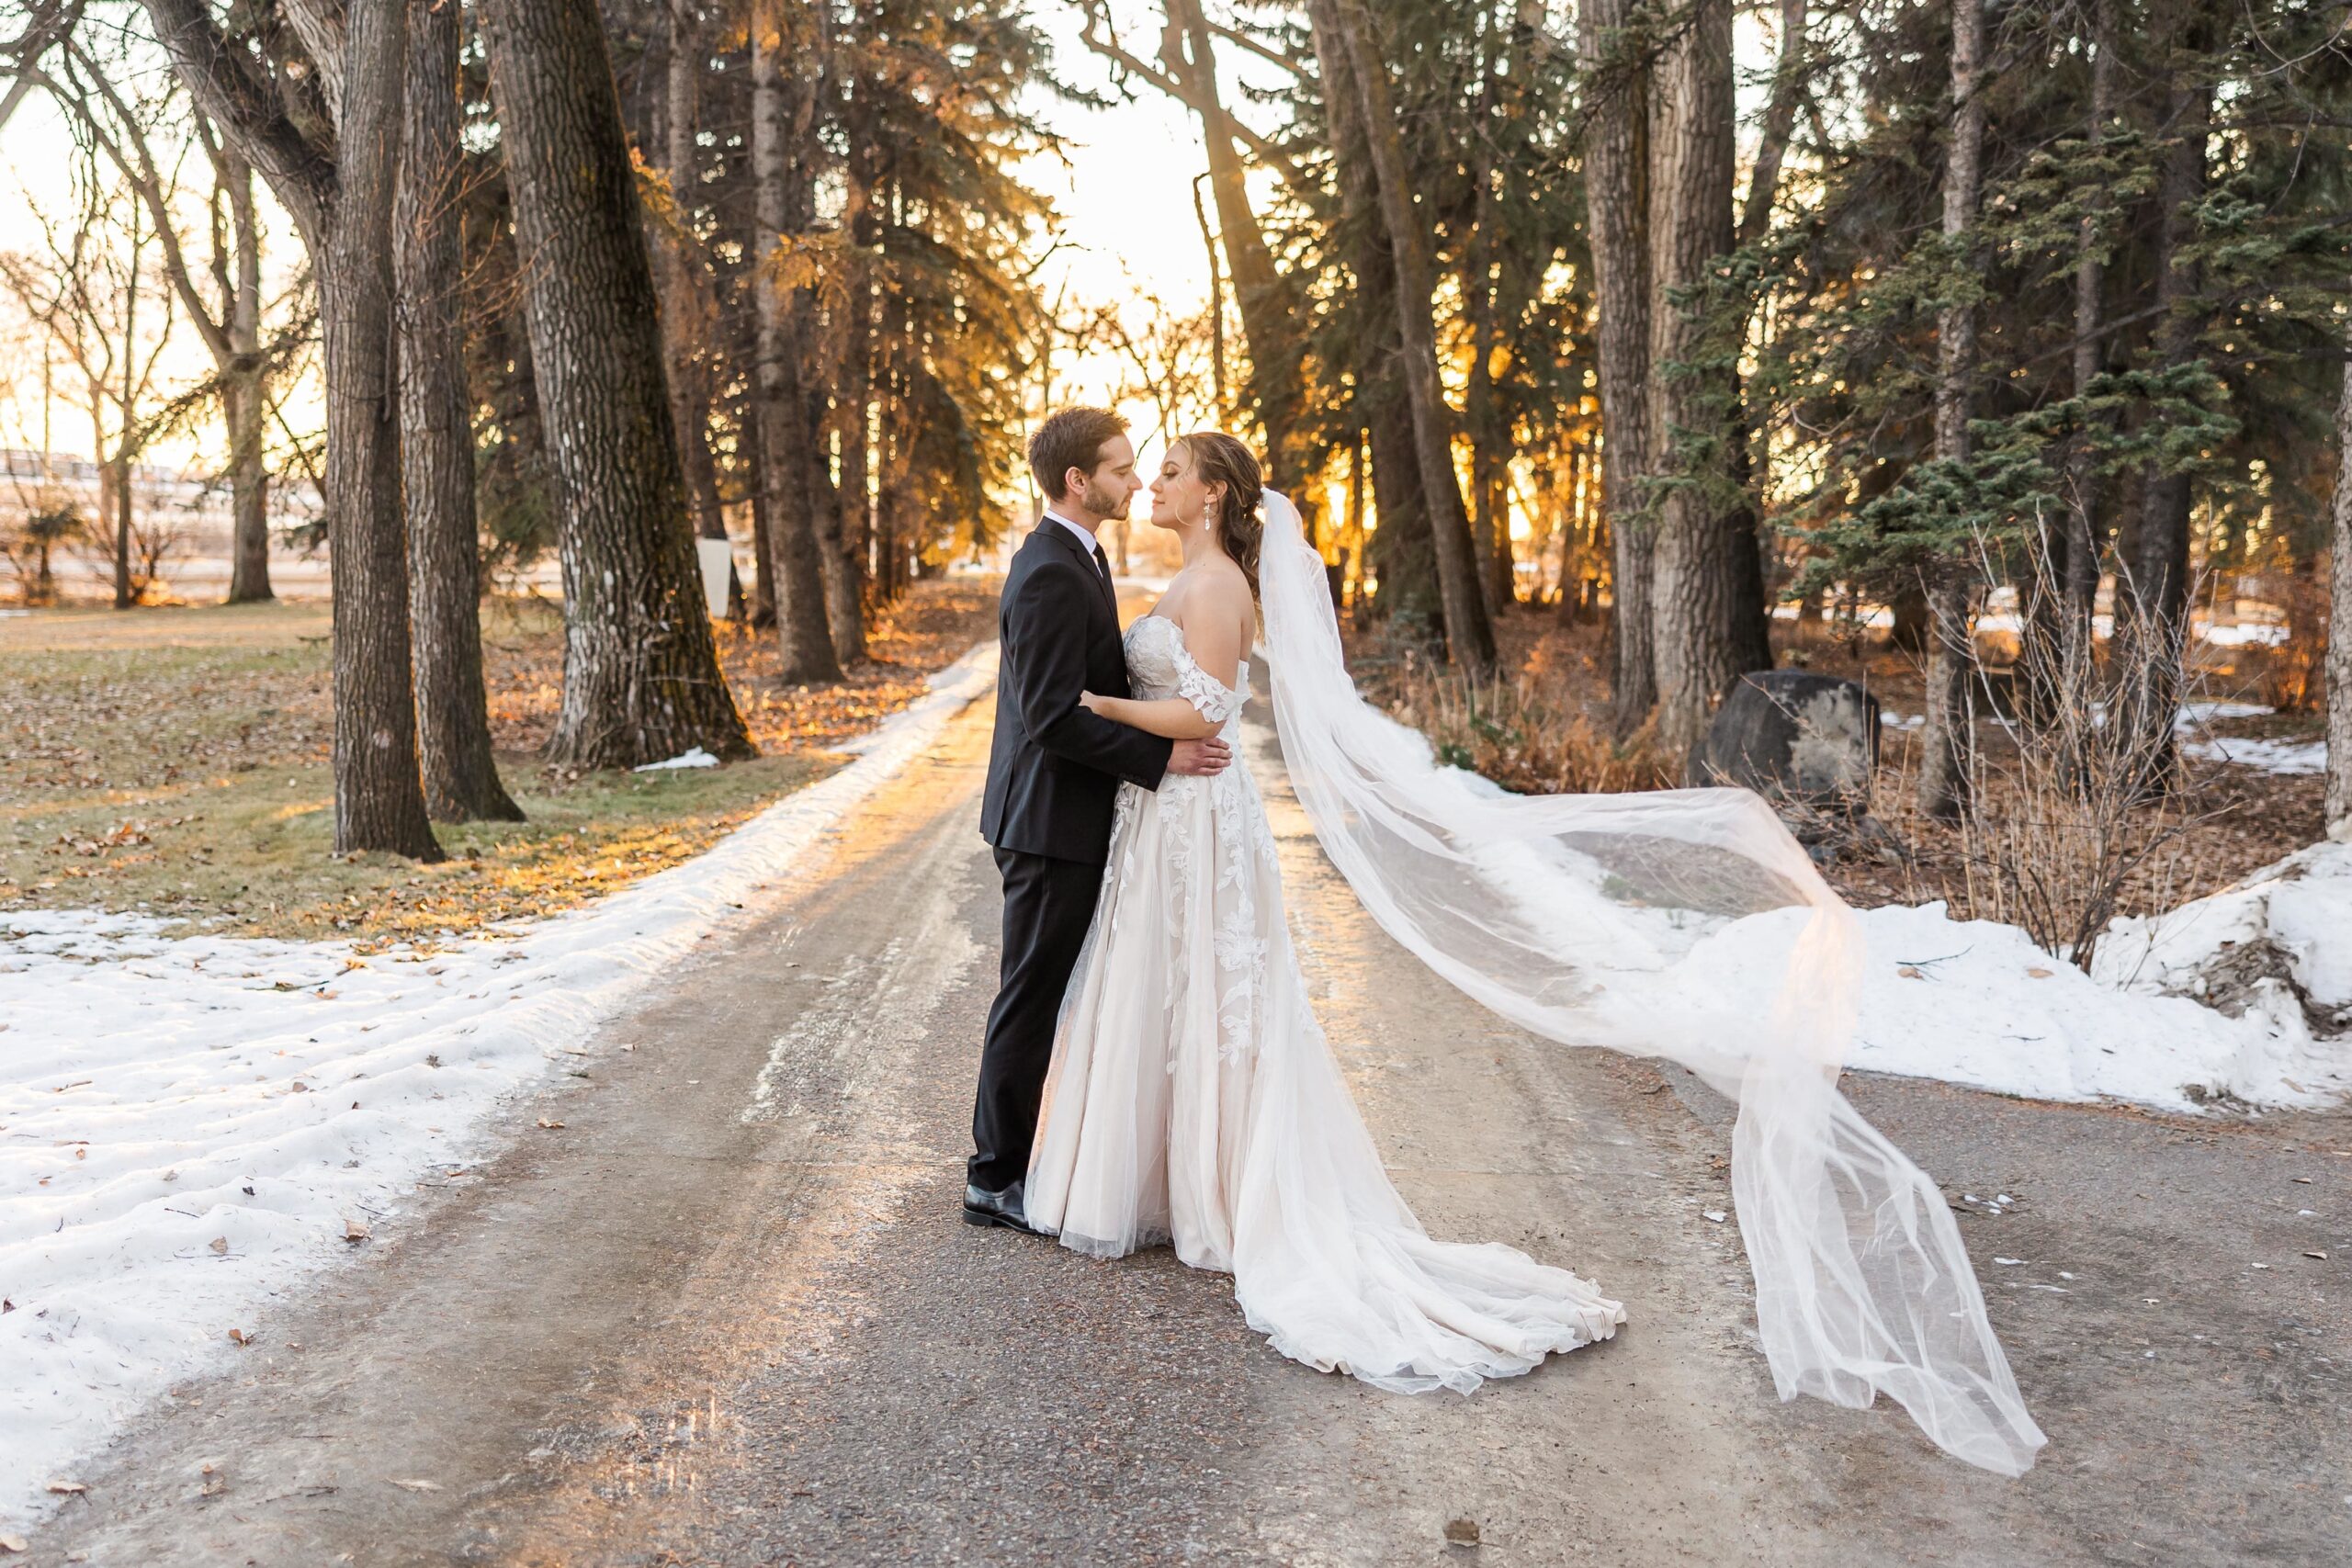 Brittany Anne Photography – Winter Wonderland at the Norland Historic Estate-15